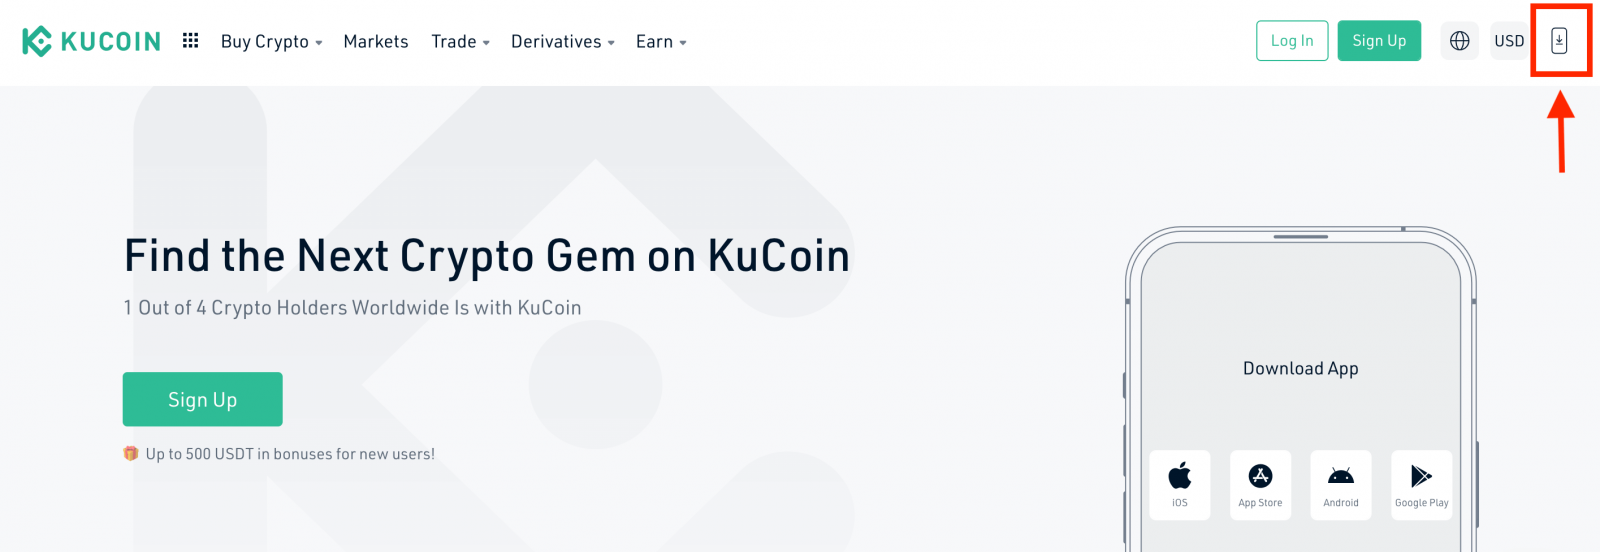 How to Open a Trading Account and Register at KuCoin